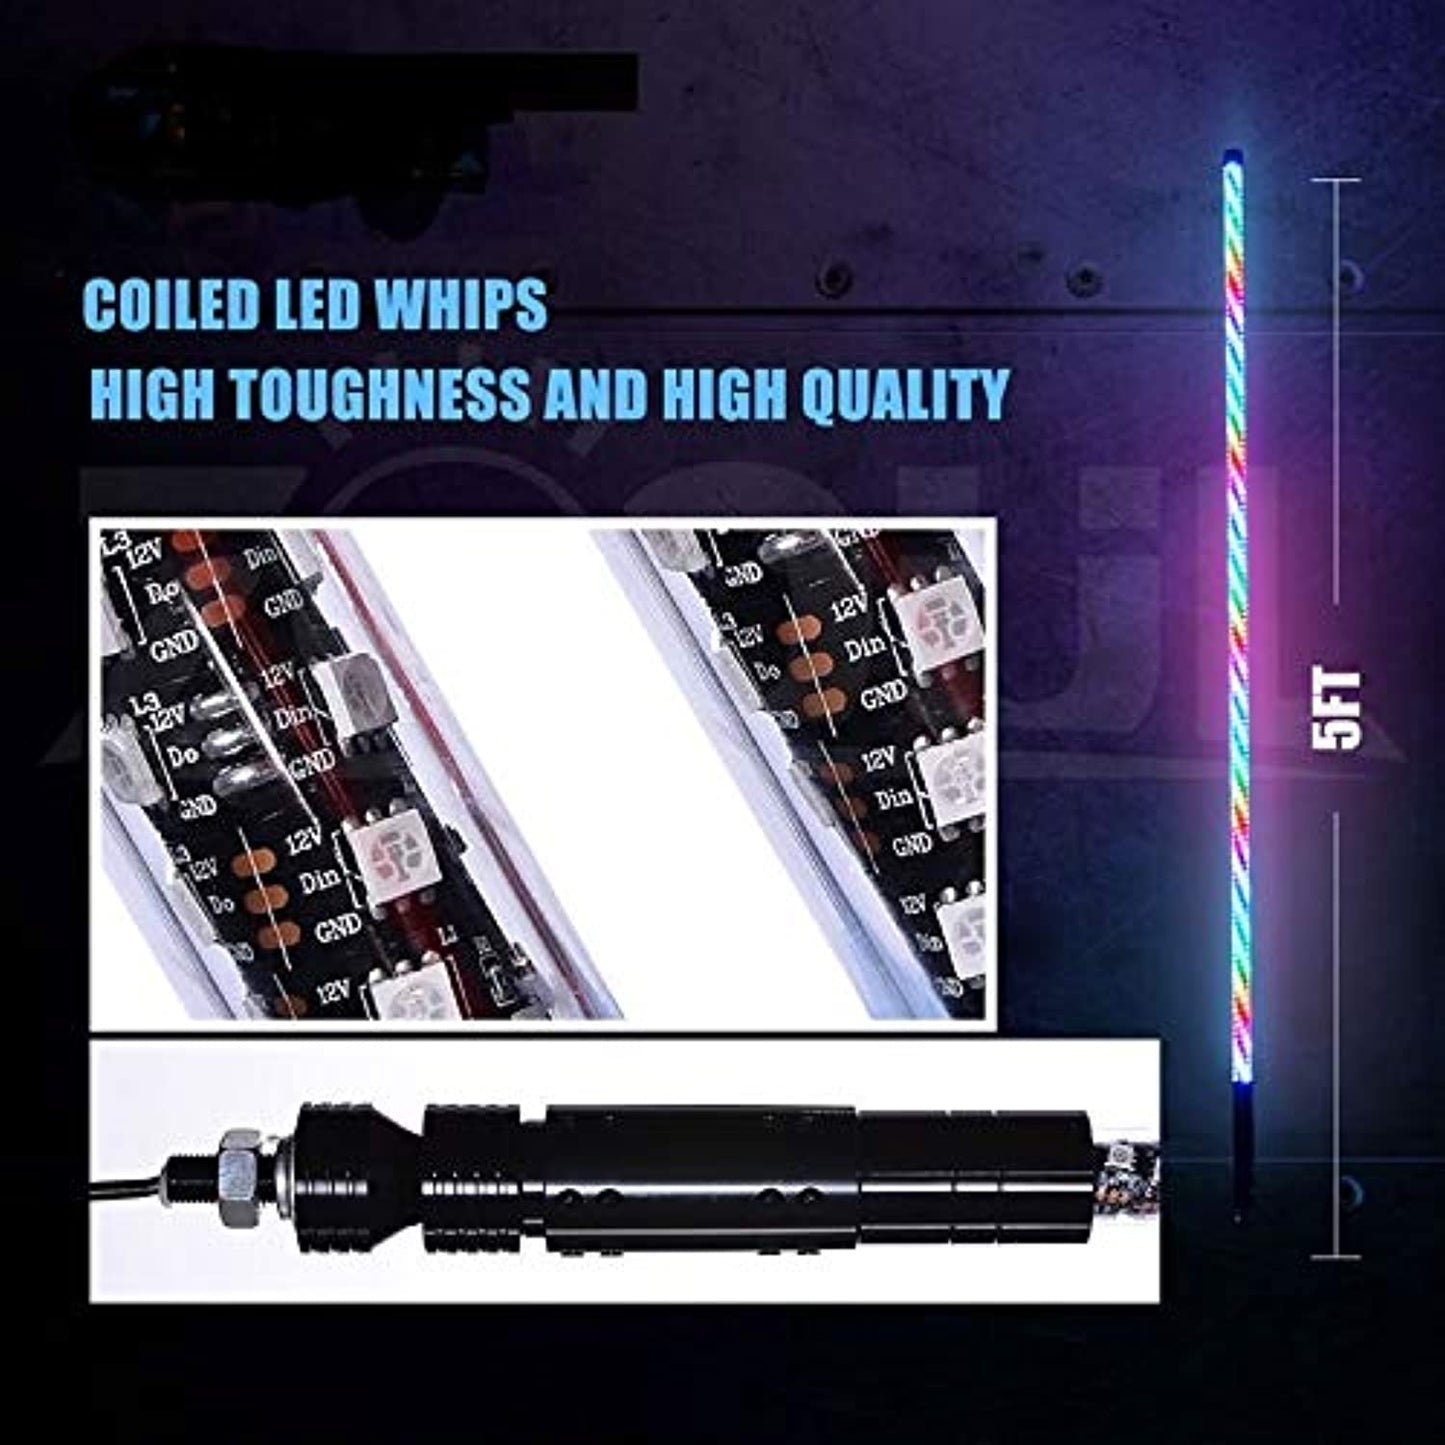 Race Sport Lighting RS8193FT 3-Foot Long ColorADAPT® Chasing RGB Multi-Color Whip with Remote Control and over 150+ Patterns